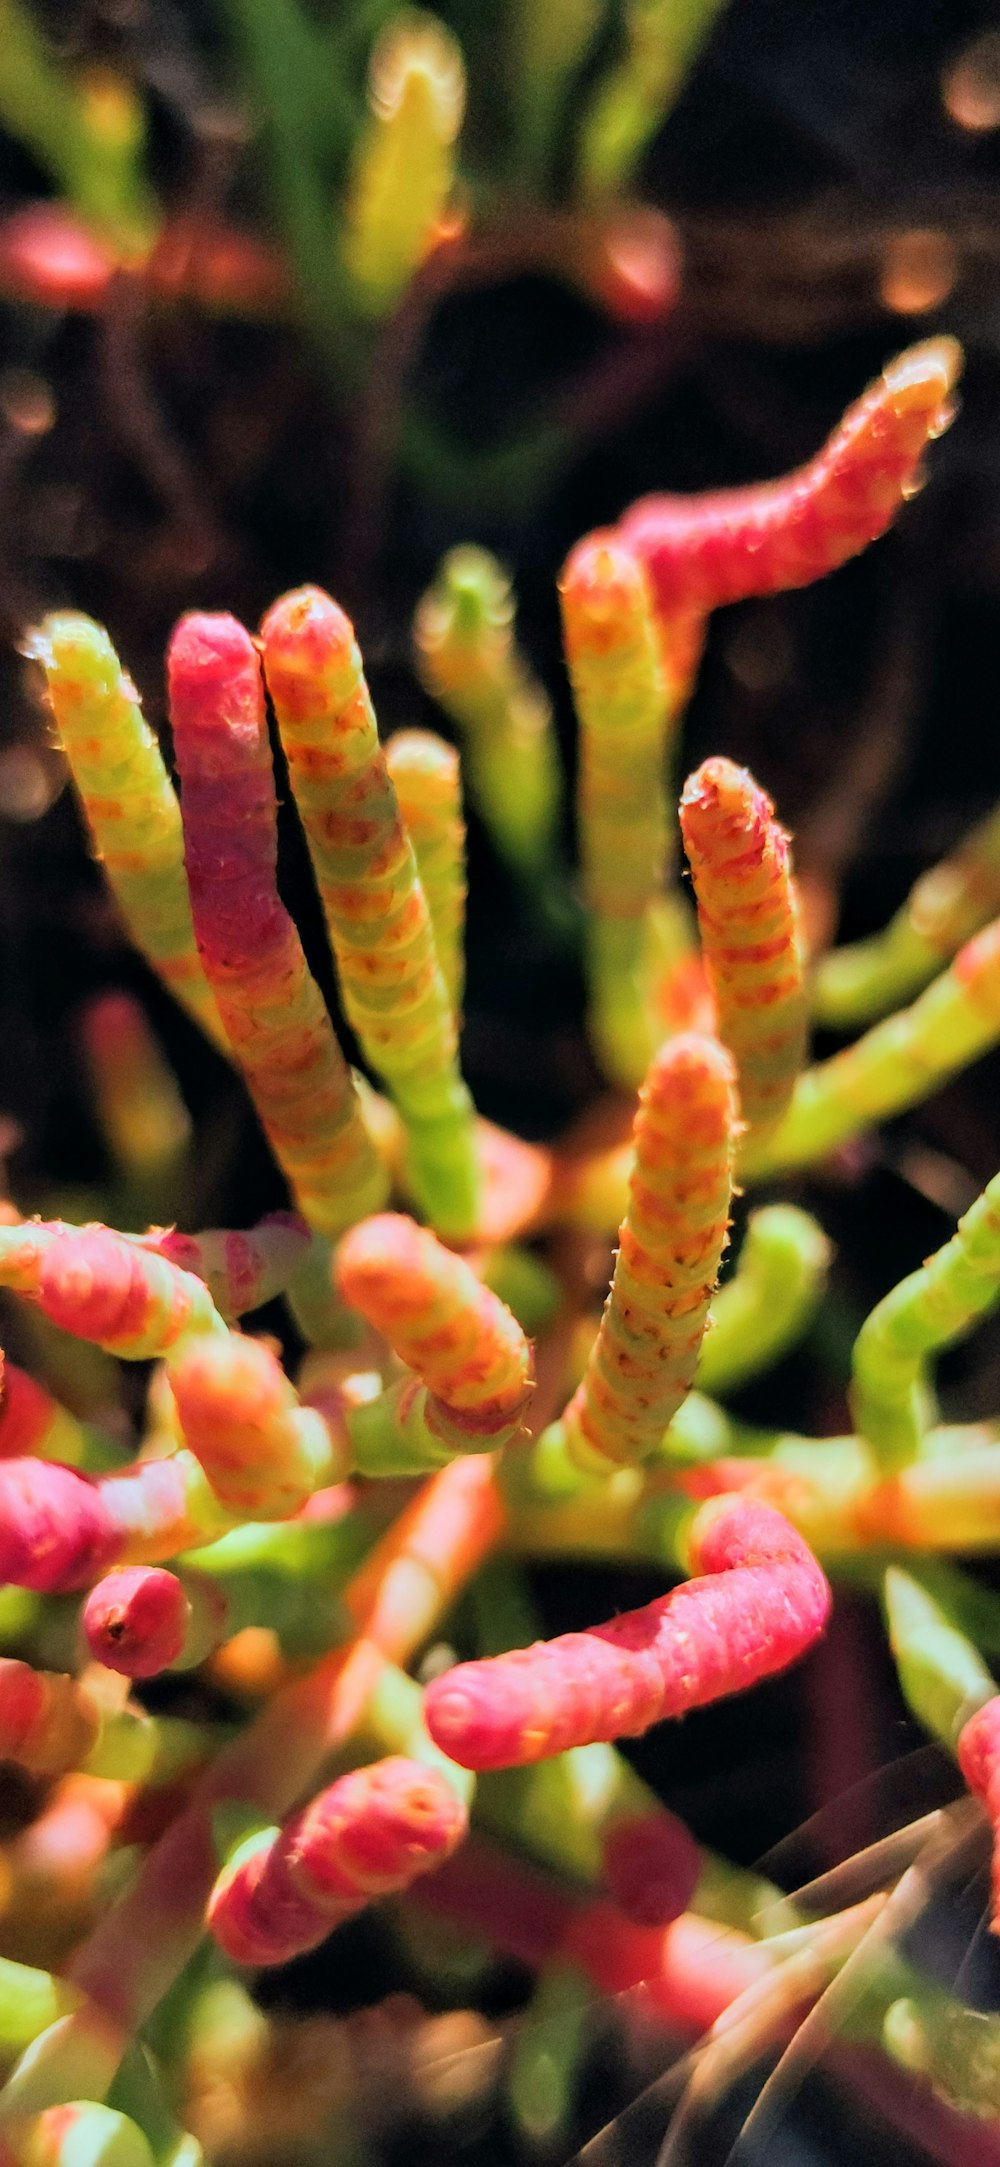 a close up of a plant with red and green stems